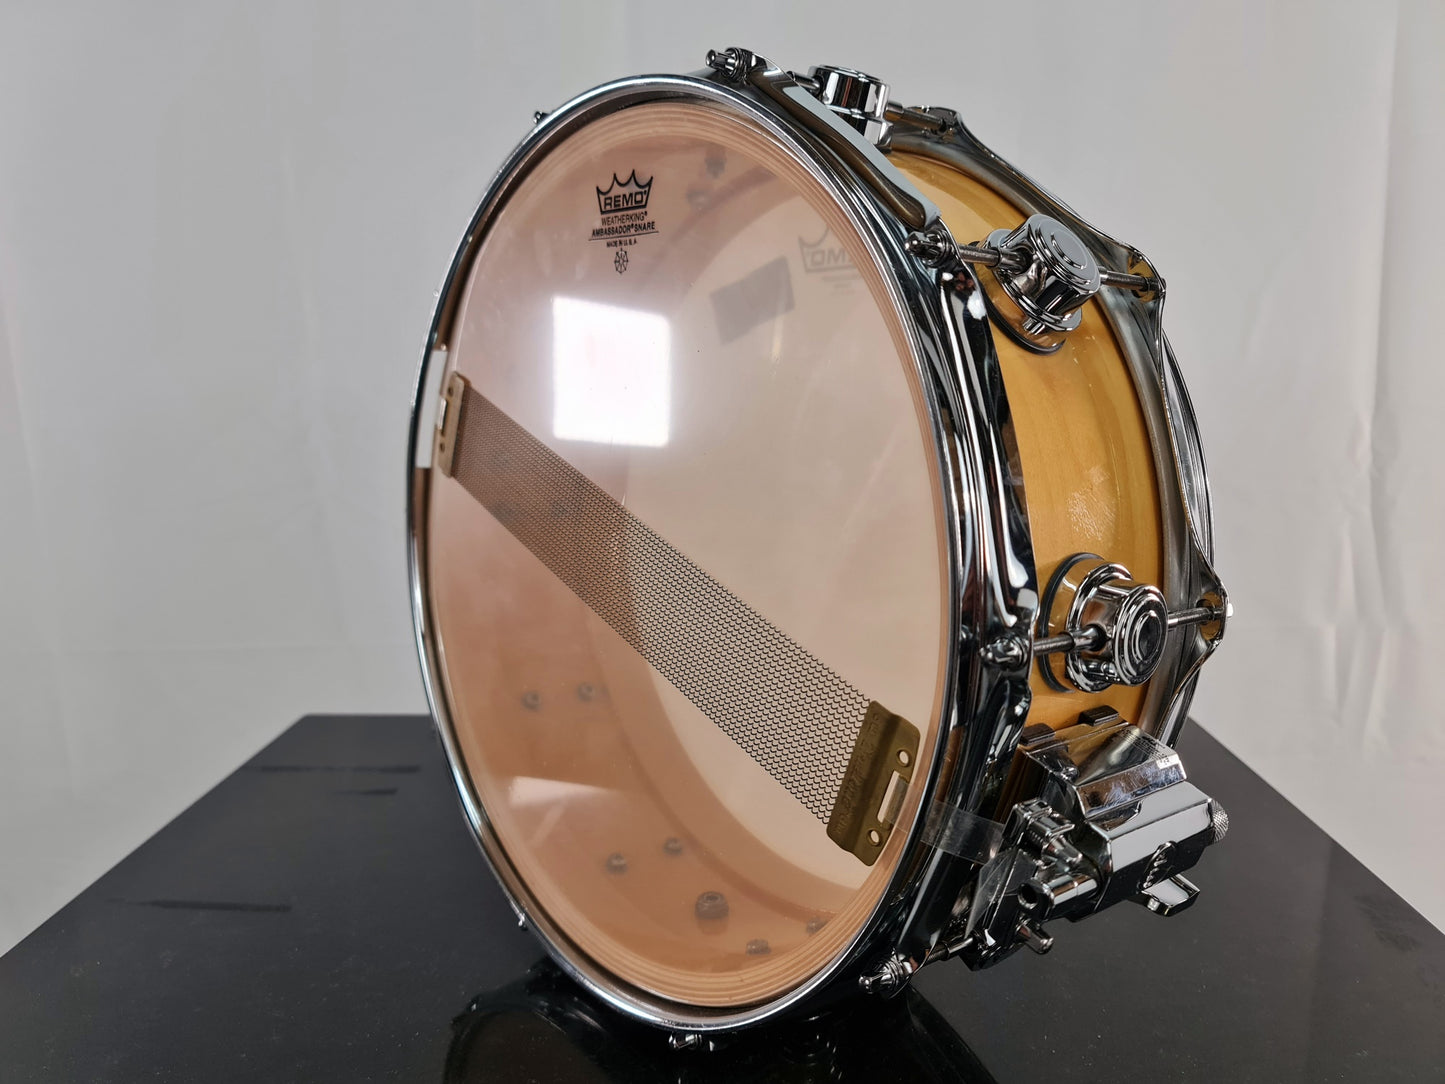 DW Collector’s Maple 14 X 5" Snare Drum - Natural Satin Oil